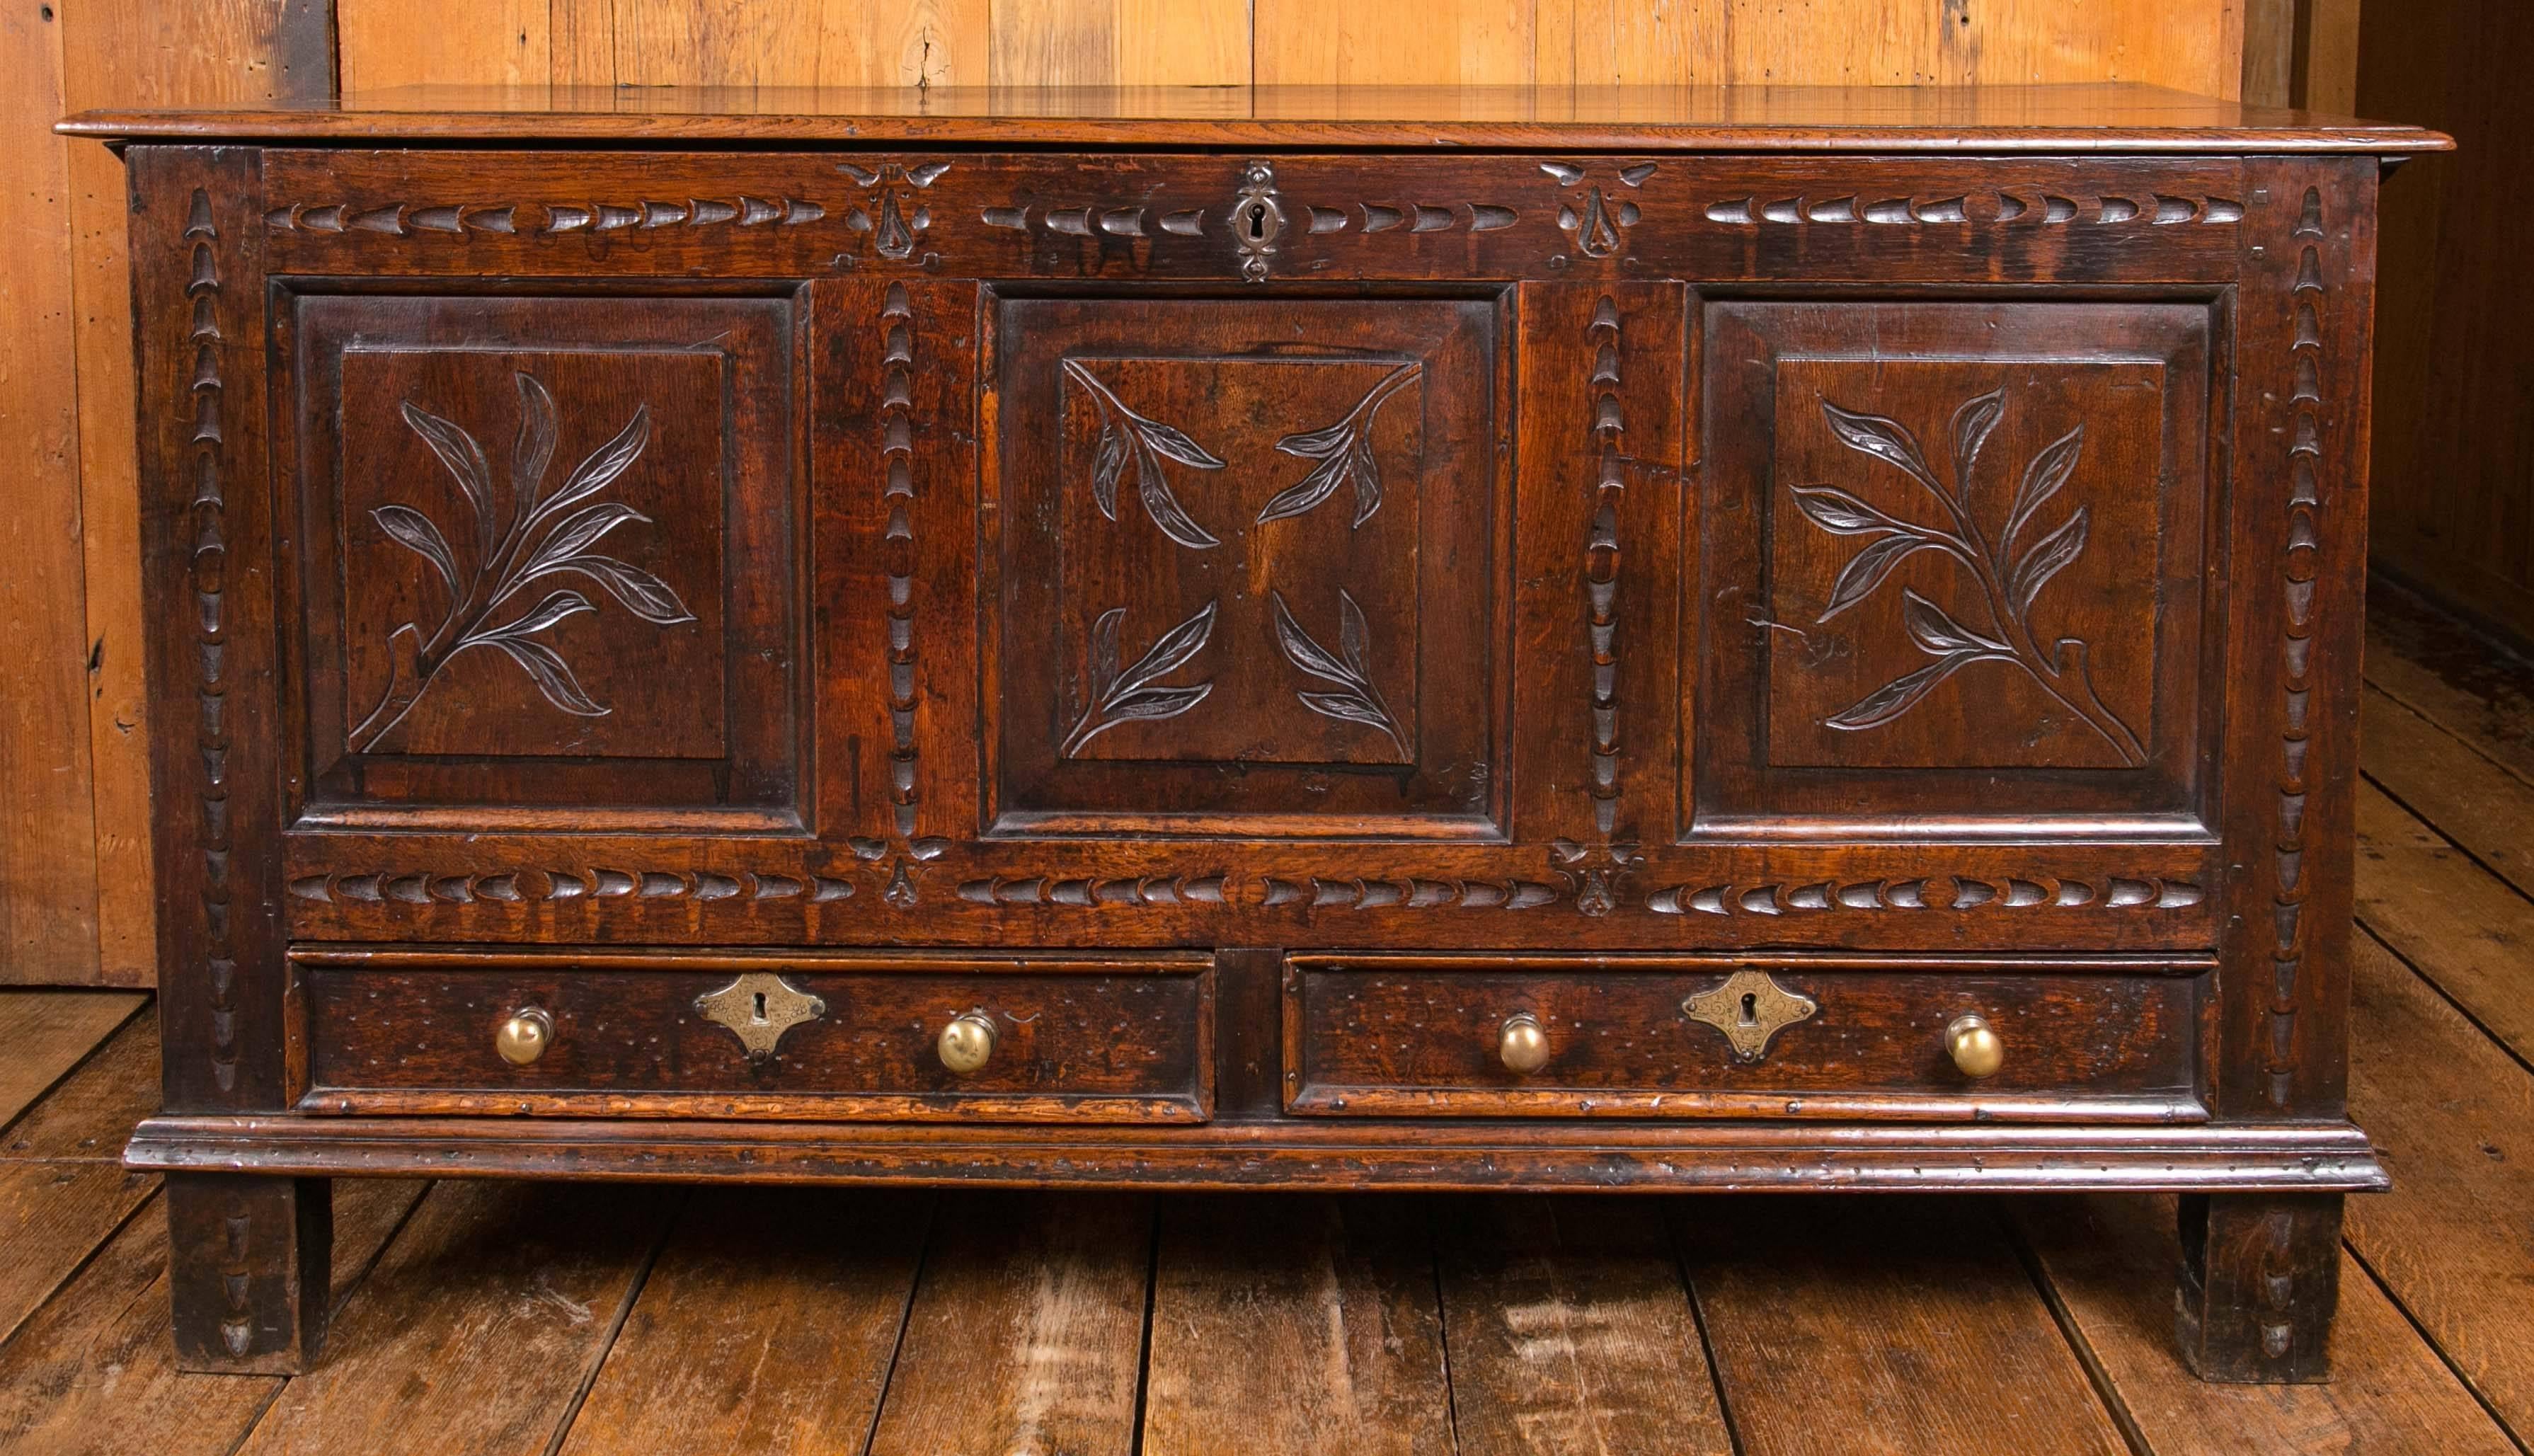 Elm, two-drawer mule chest / coffer, probably of Irish origin. Three fielded panels on the front with carved foliate decoration and original steel escutcheon lock plate. The two drawers are pine lined and have original brass, escutcheon plates and